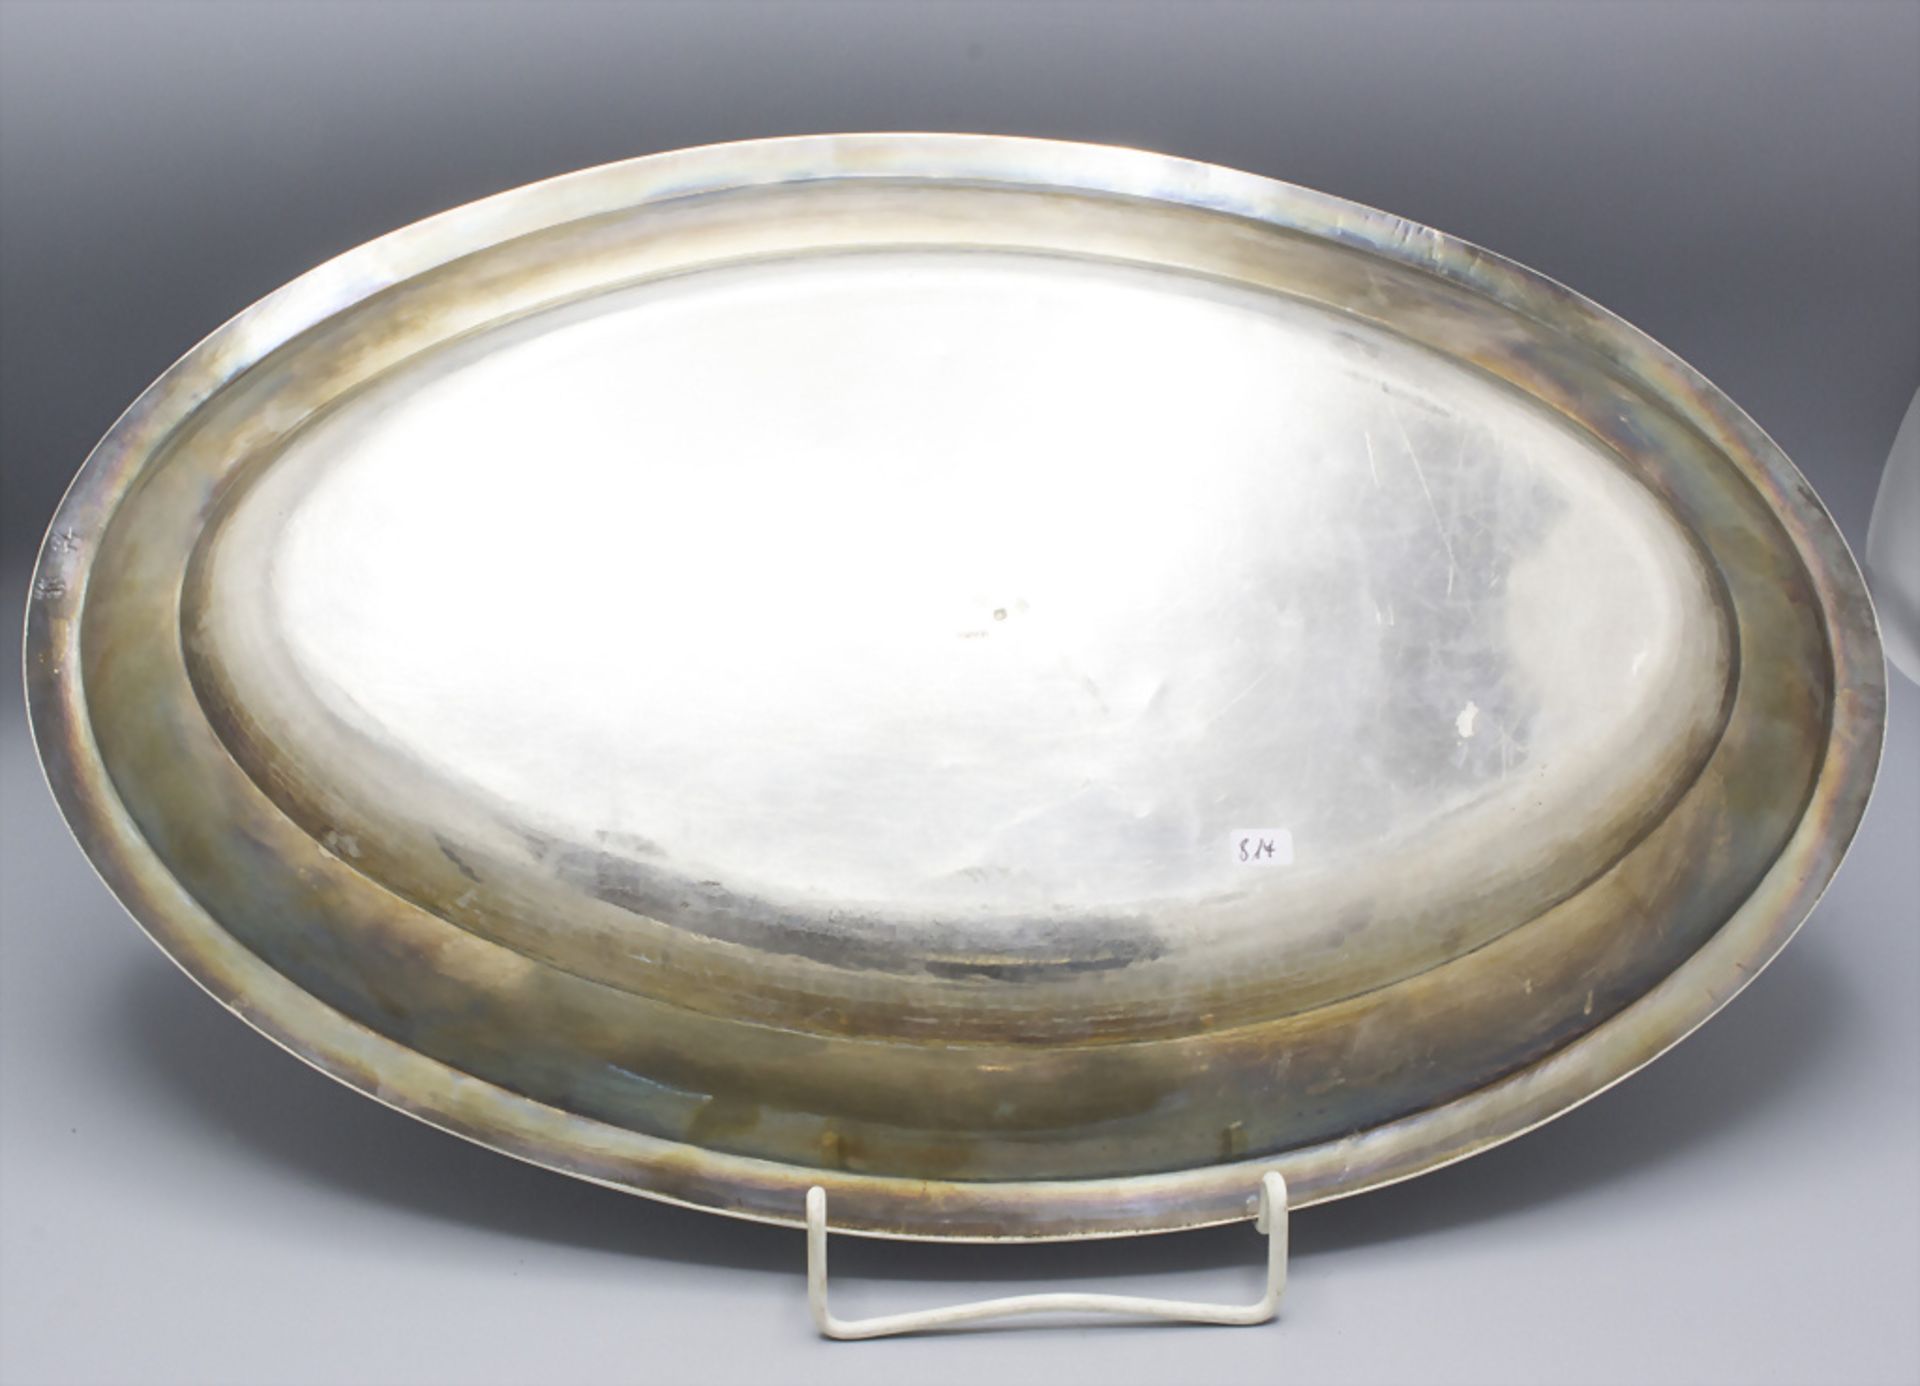 Ovale Platte / An oval silver tray, D. Legrand, Paris, nach 1819 - Image 2 of 5